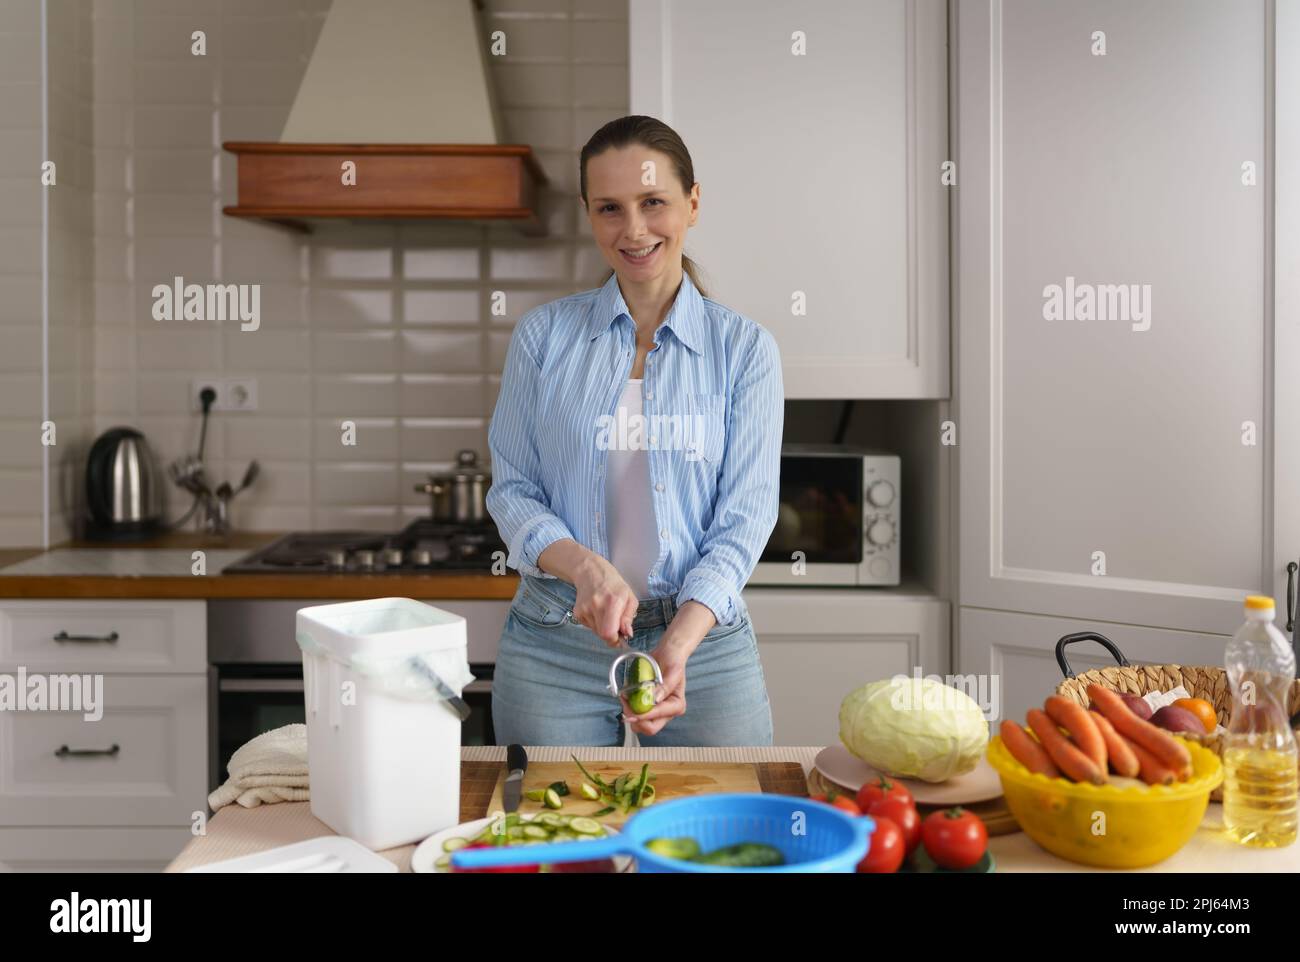 https://c8.alamy.com/comp/2PJ64M3/happy-adult-woman-peeling-off-cucumbers-for-lunch-and-composting-organic-food-waste-in-a-compost-bin-2PJ64M3.jpg